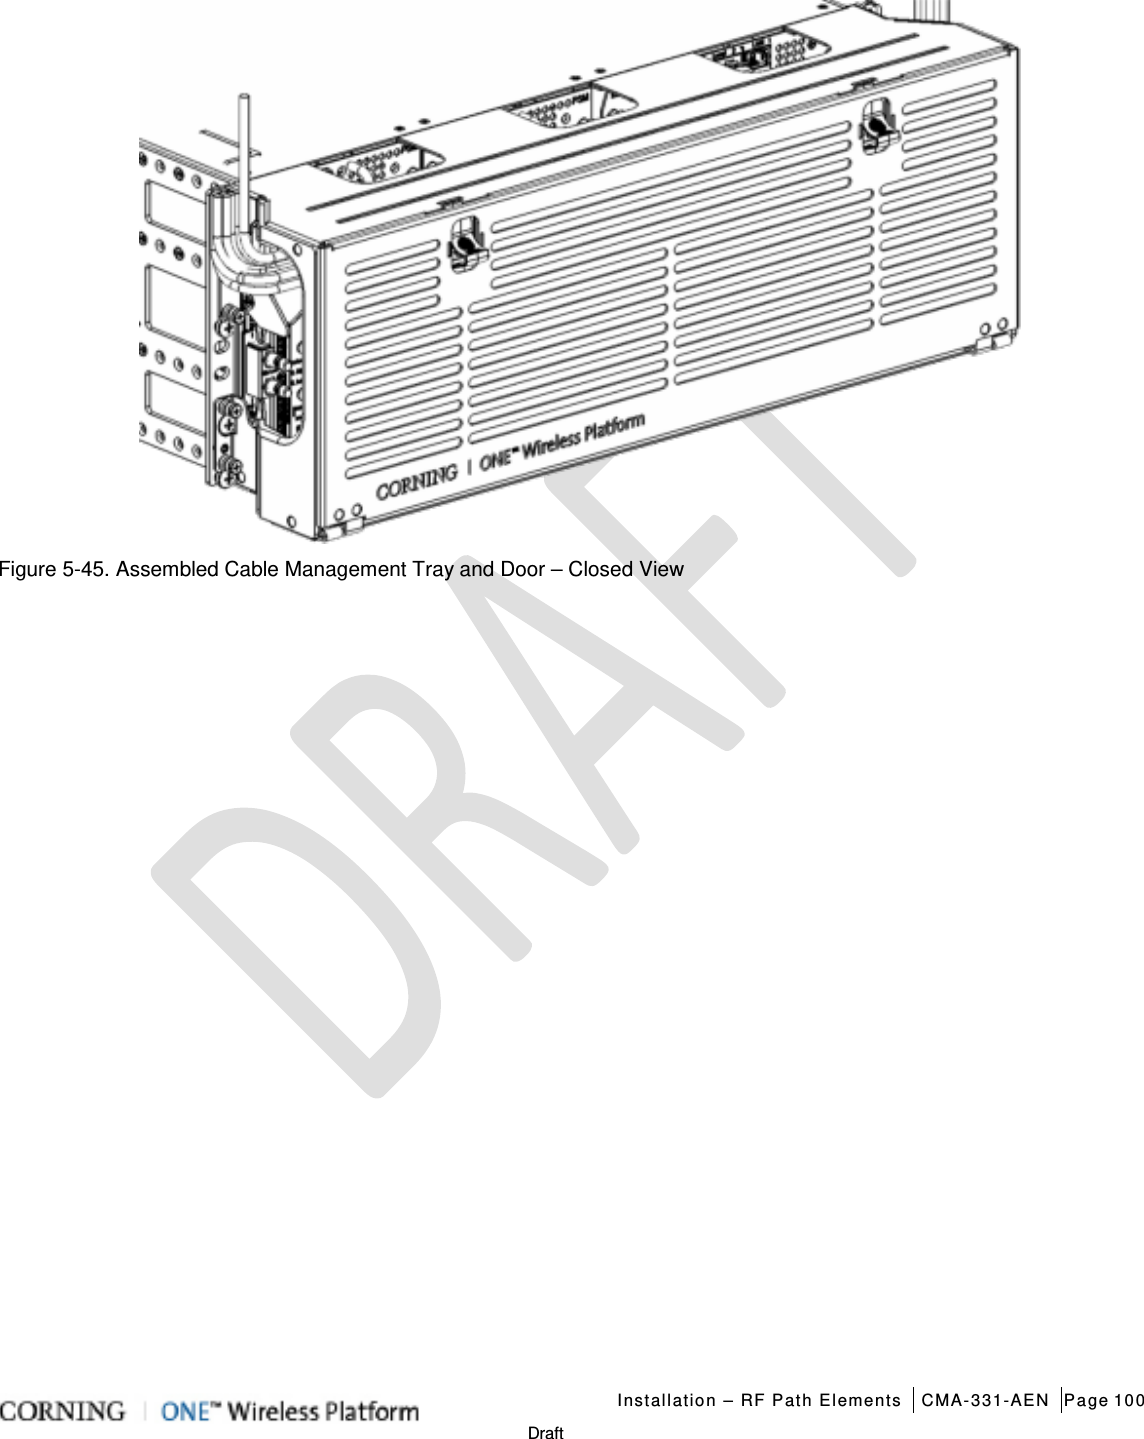   Installation – RF Path Elements CMA-331-AEN Page 100   Draft  Figure  5-45. Assembled Cable Management Tray and Door – Closed View    